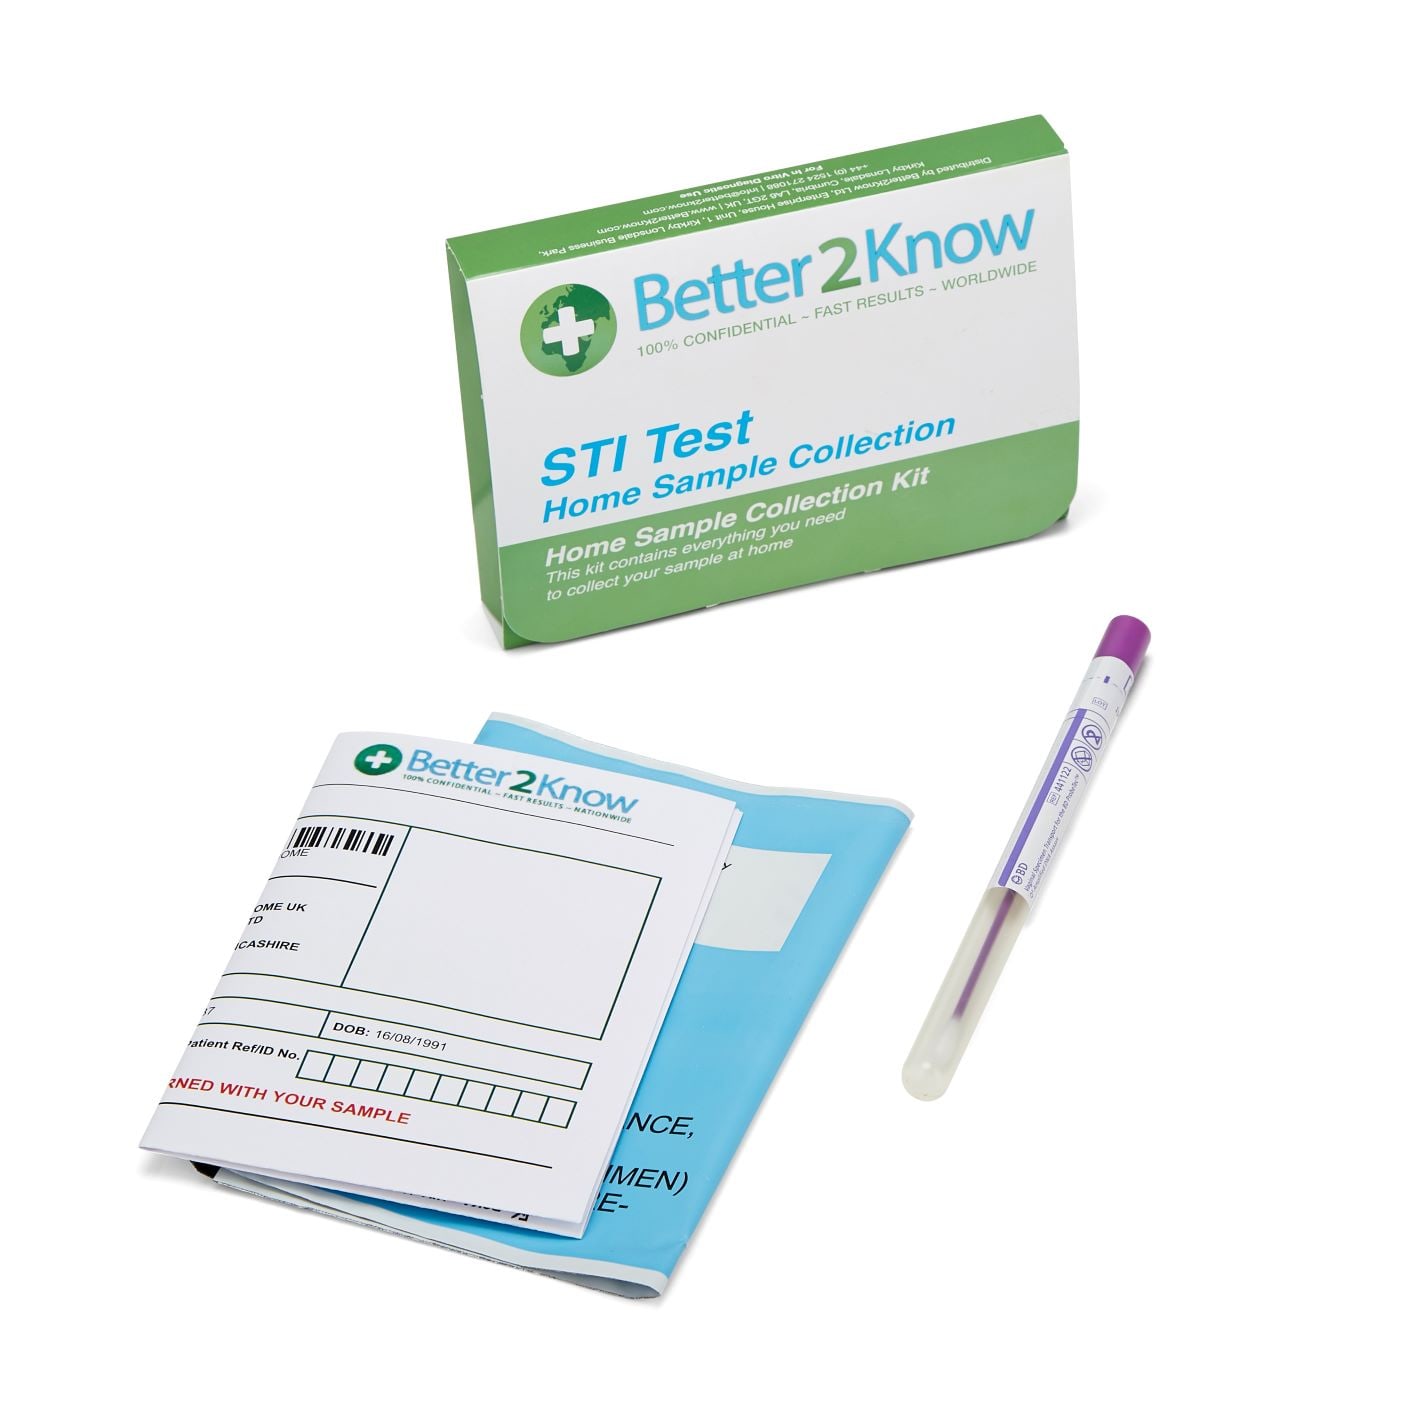 Chlamydia and Gonorrhoea Vaginal Swab Home Test